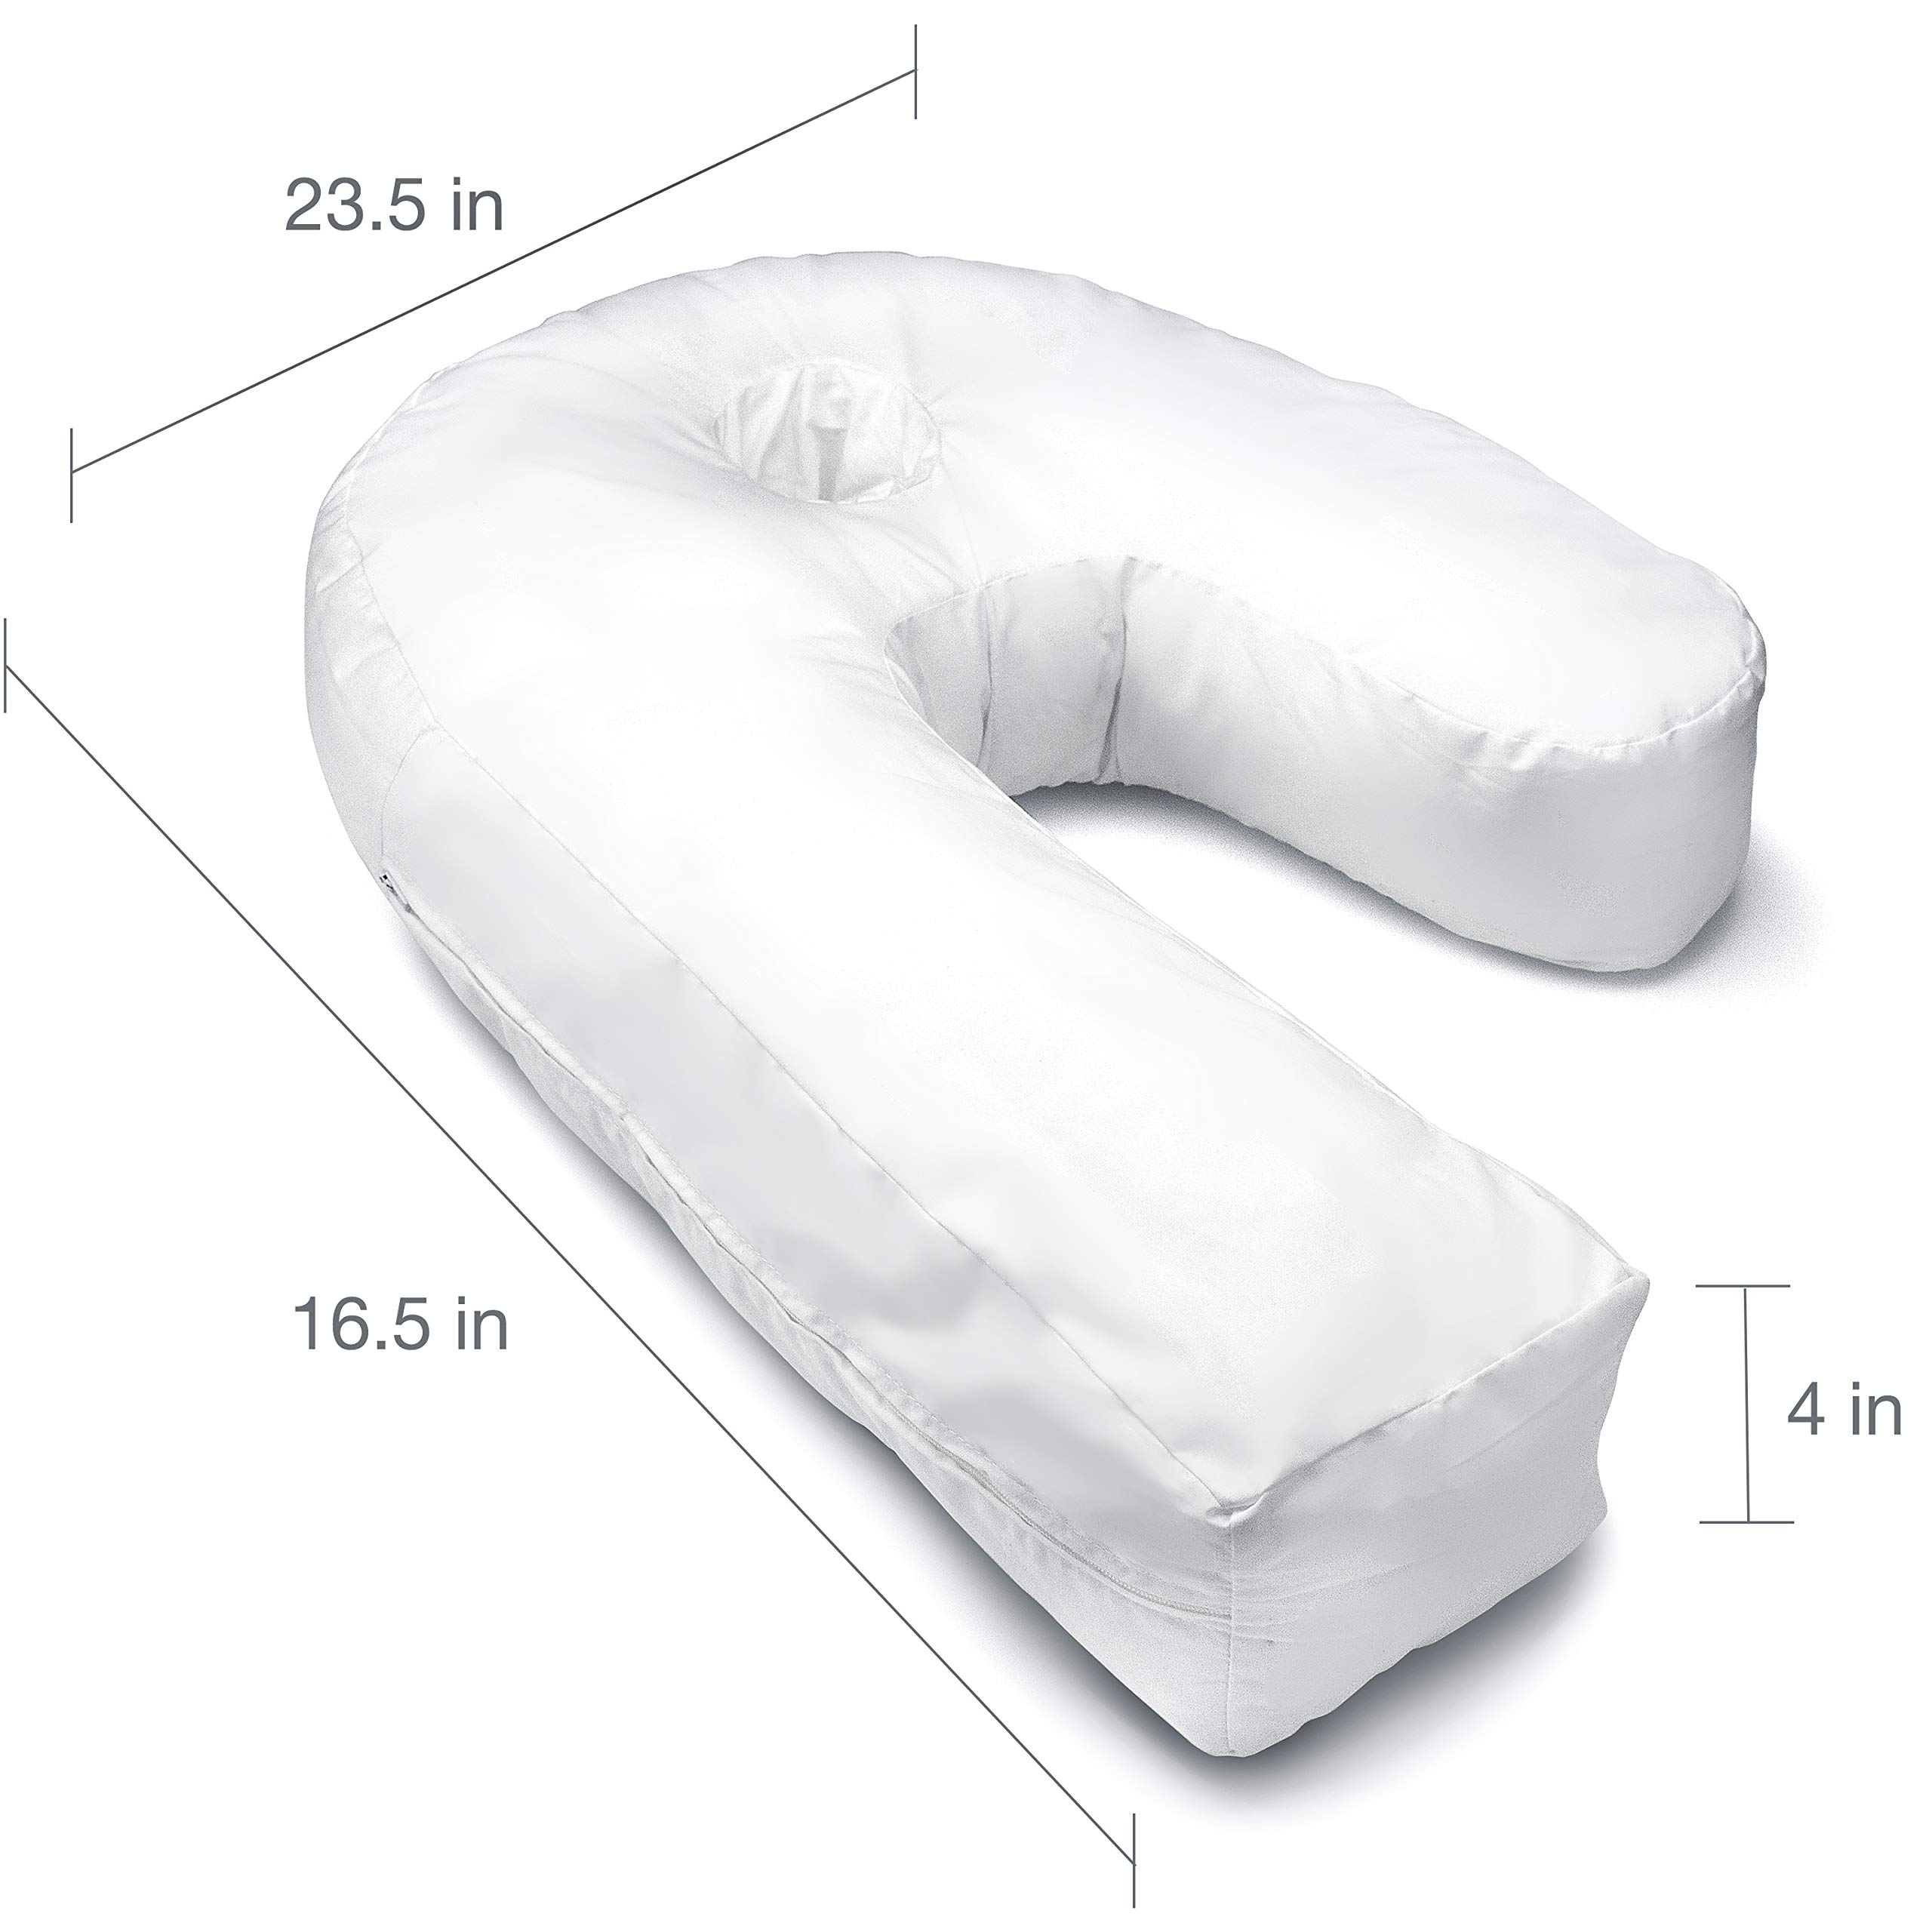 DMI Protective Pillowcase for The Side Sleeper Pillow, Extends Product Life of Pillow, Protects Against Moisture & Stains, Zipper & Snap Enclosure, FSA & HSA Eligible, White